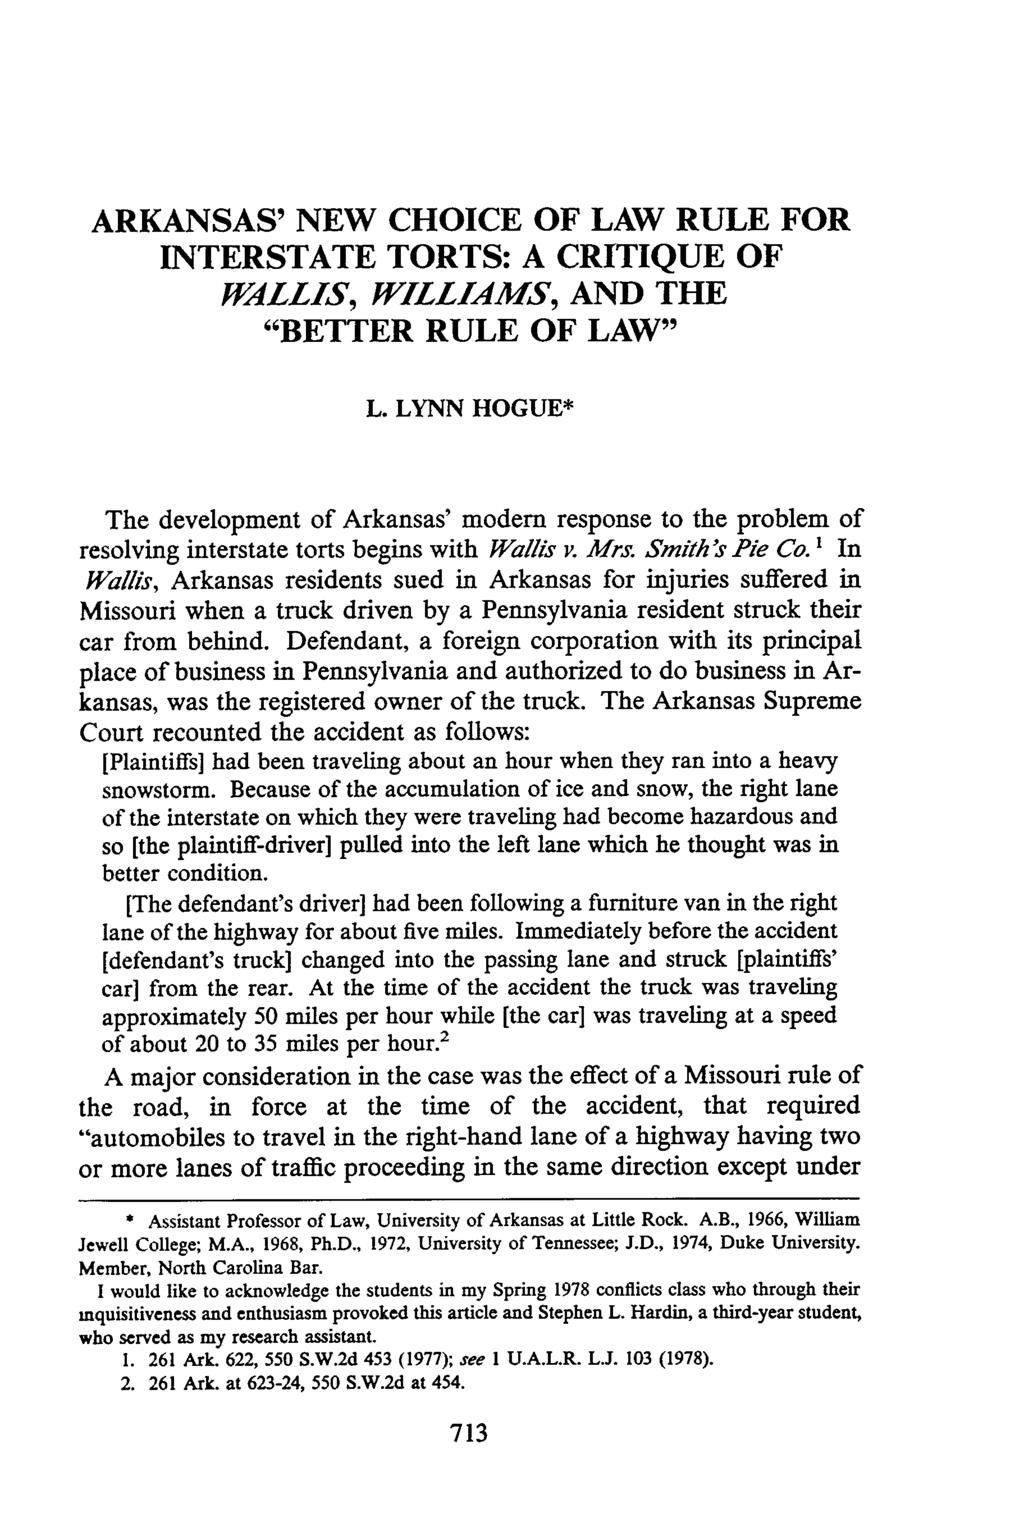 ARKANSAS' NEW CHOICE OF LAW RULE FOR INTERSTATE TORTS: A CRITIQUE OF W4LLIS, WILLIAMS, AND THE "BETTER RULE OF LAW" L.